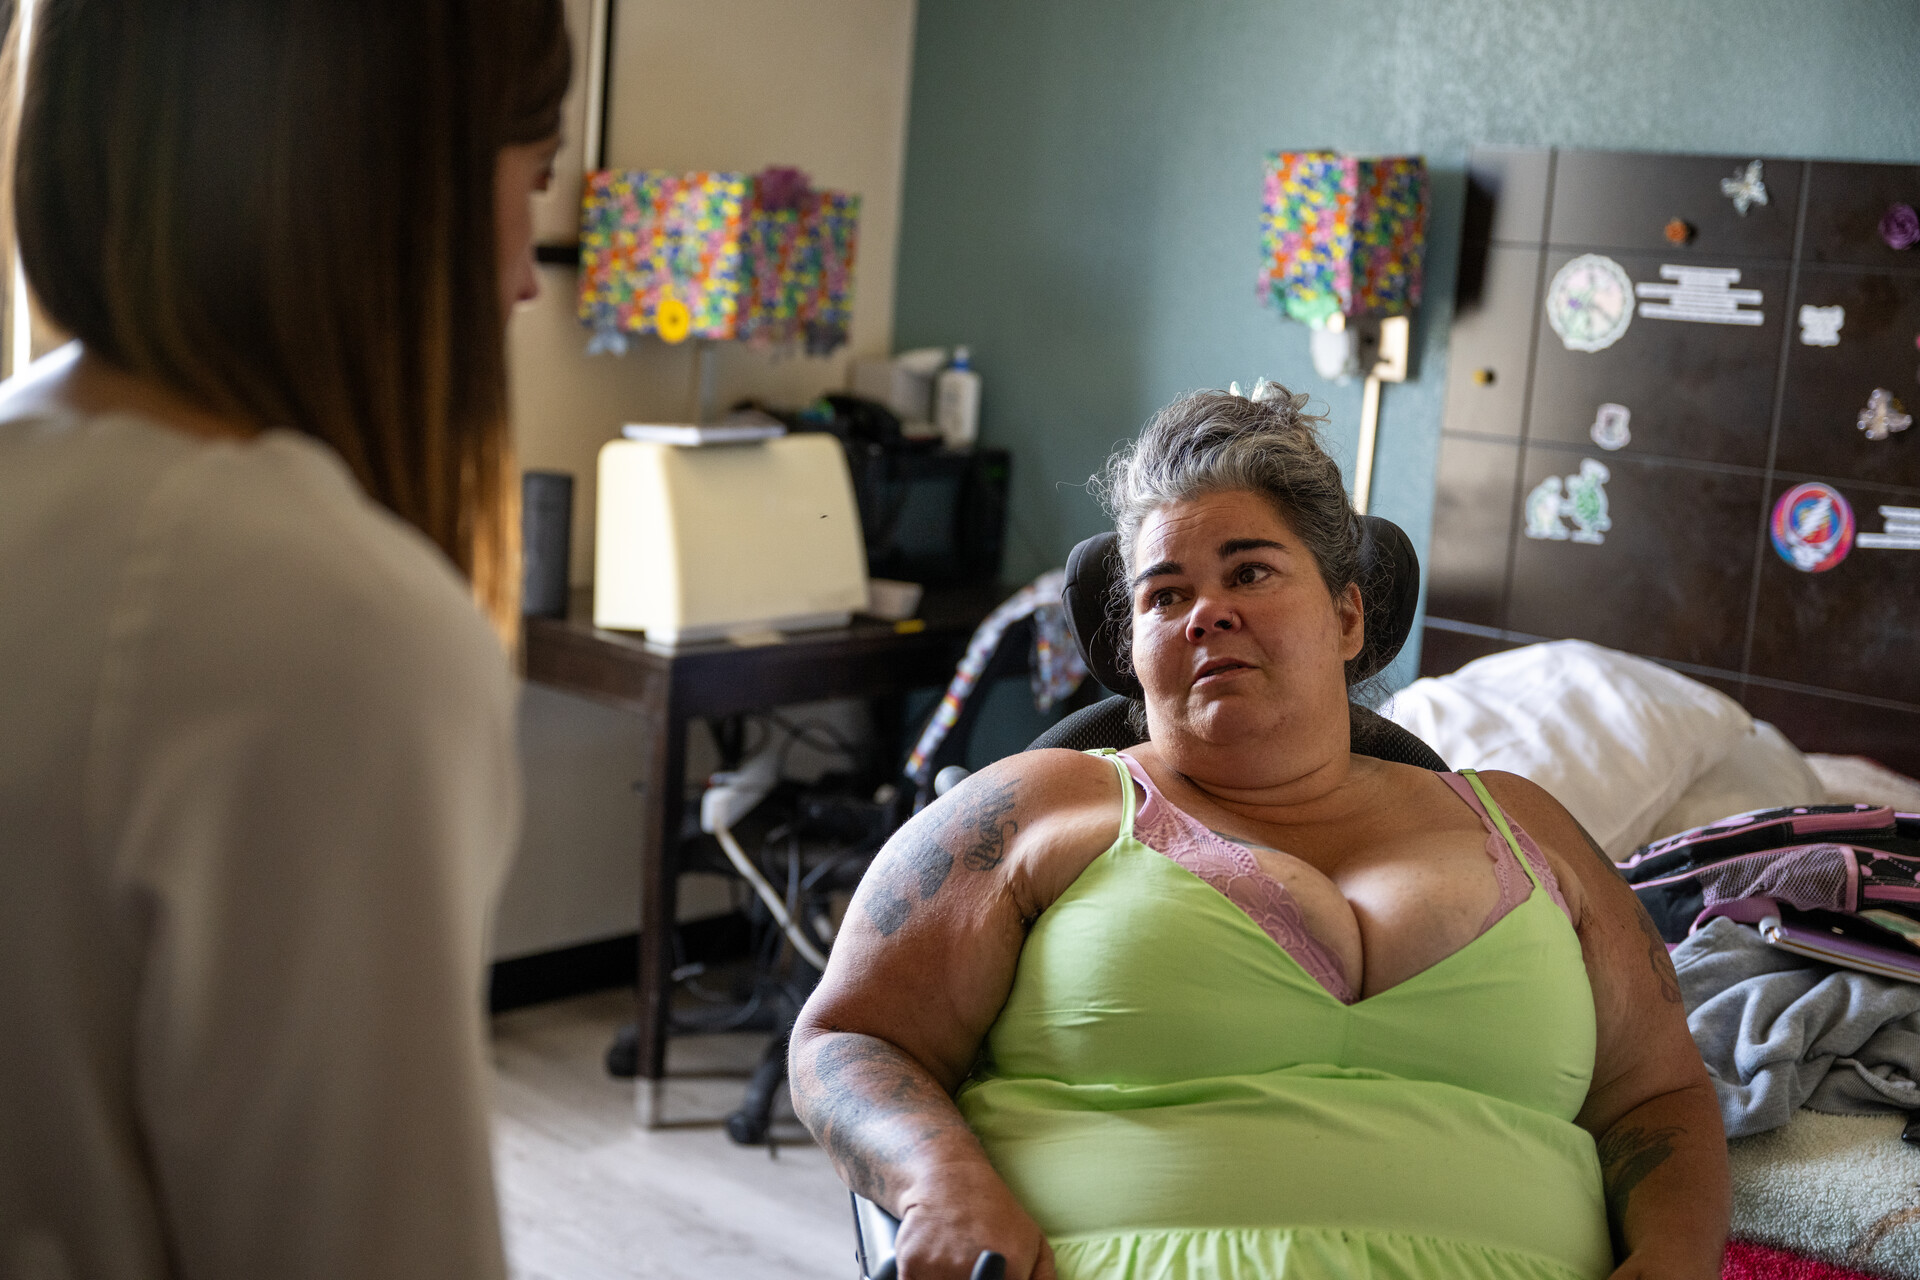 A woman seated in what appears to be a wheelchair in an apartment room with a bed in the background speaks to a woman facing away from the camera